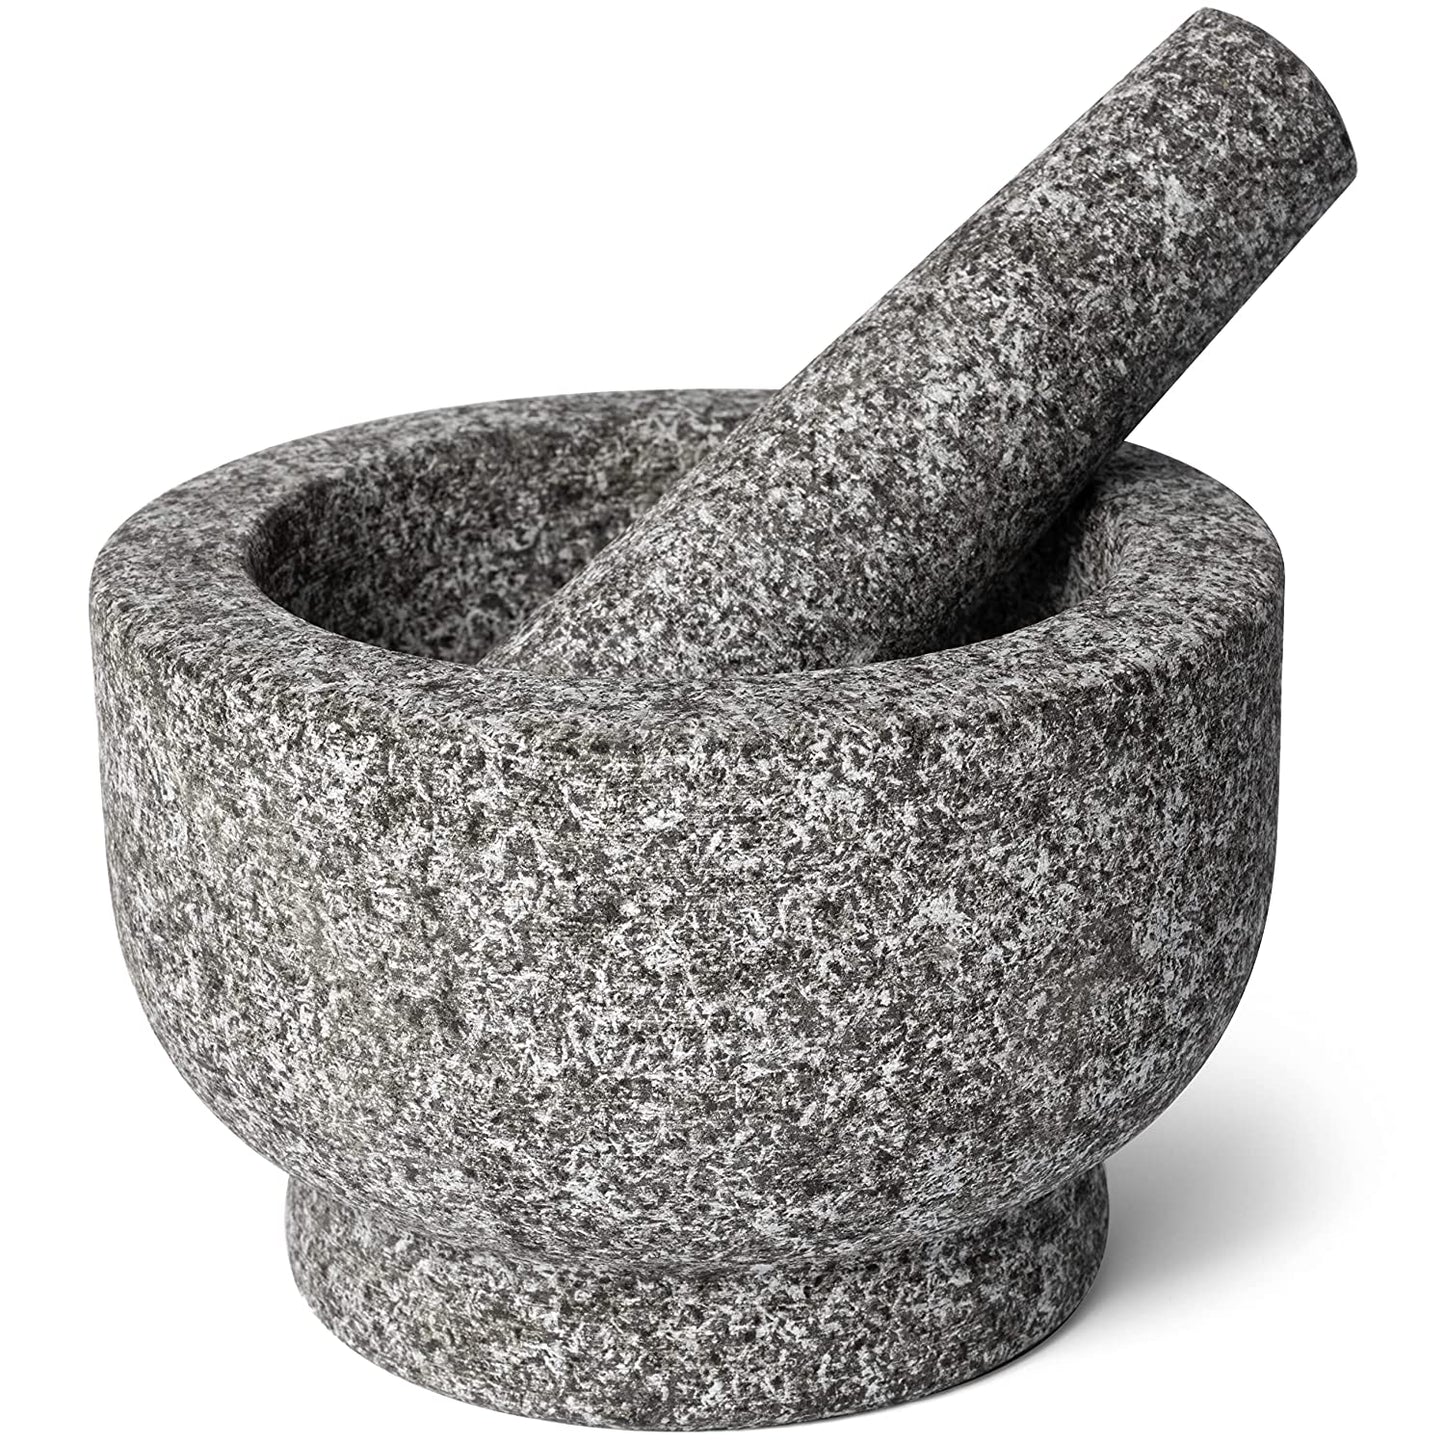 Mortar and Pestle Set 6 Inch 2 Cups Unpolished Heavy Granite Stone